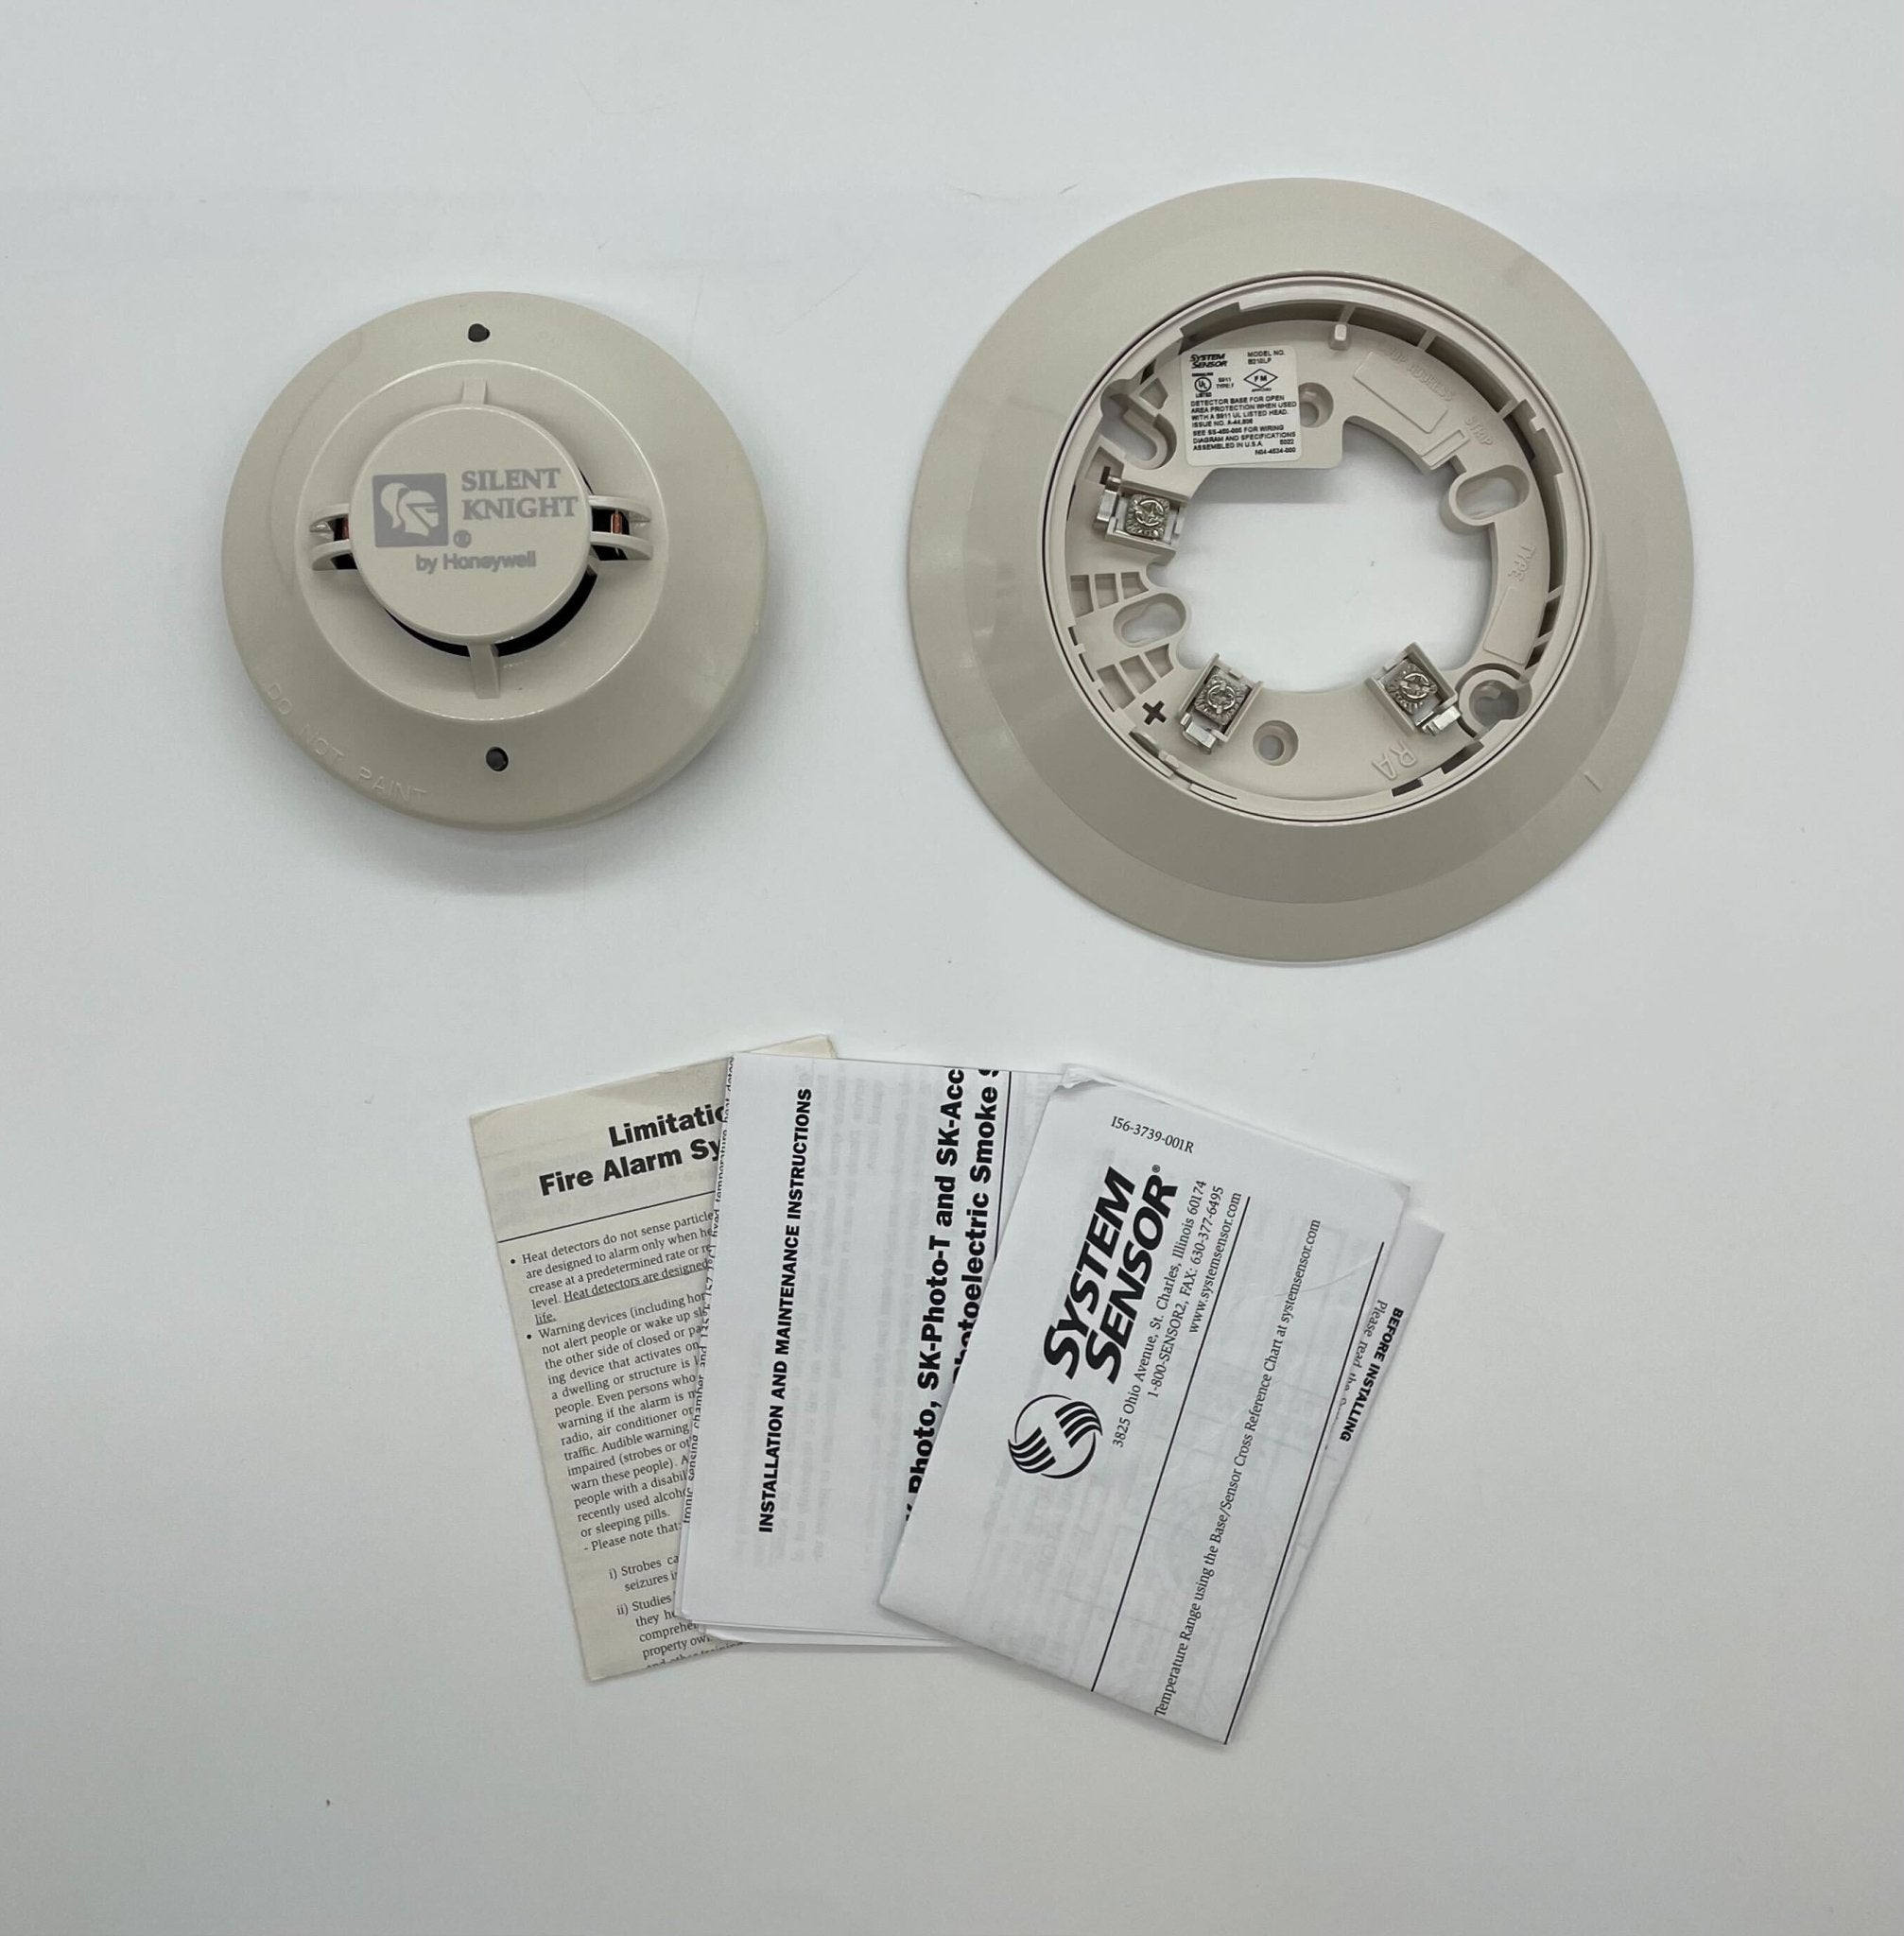 Silent Knight SK-PHOTO-T Intelligent Photoelectric Smoke Detector - The Fire Alarm Supplier